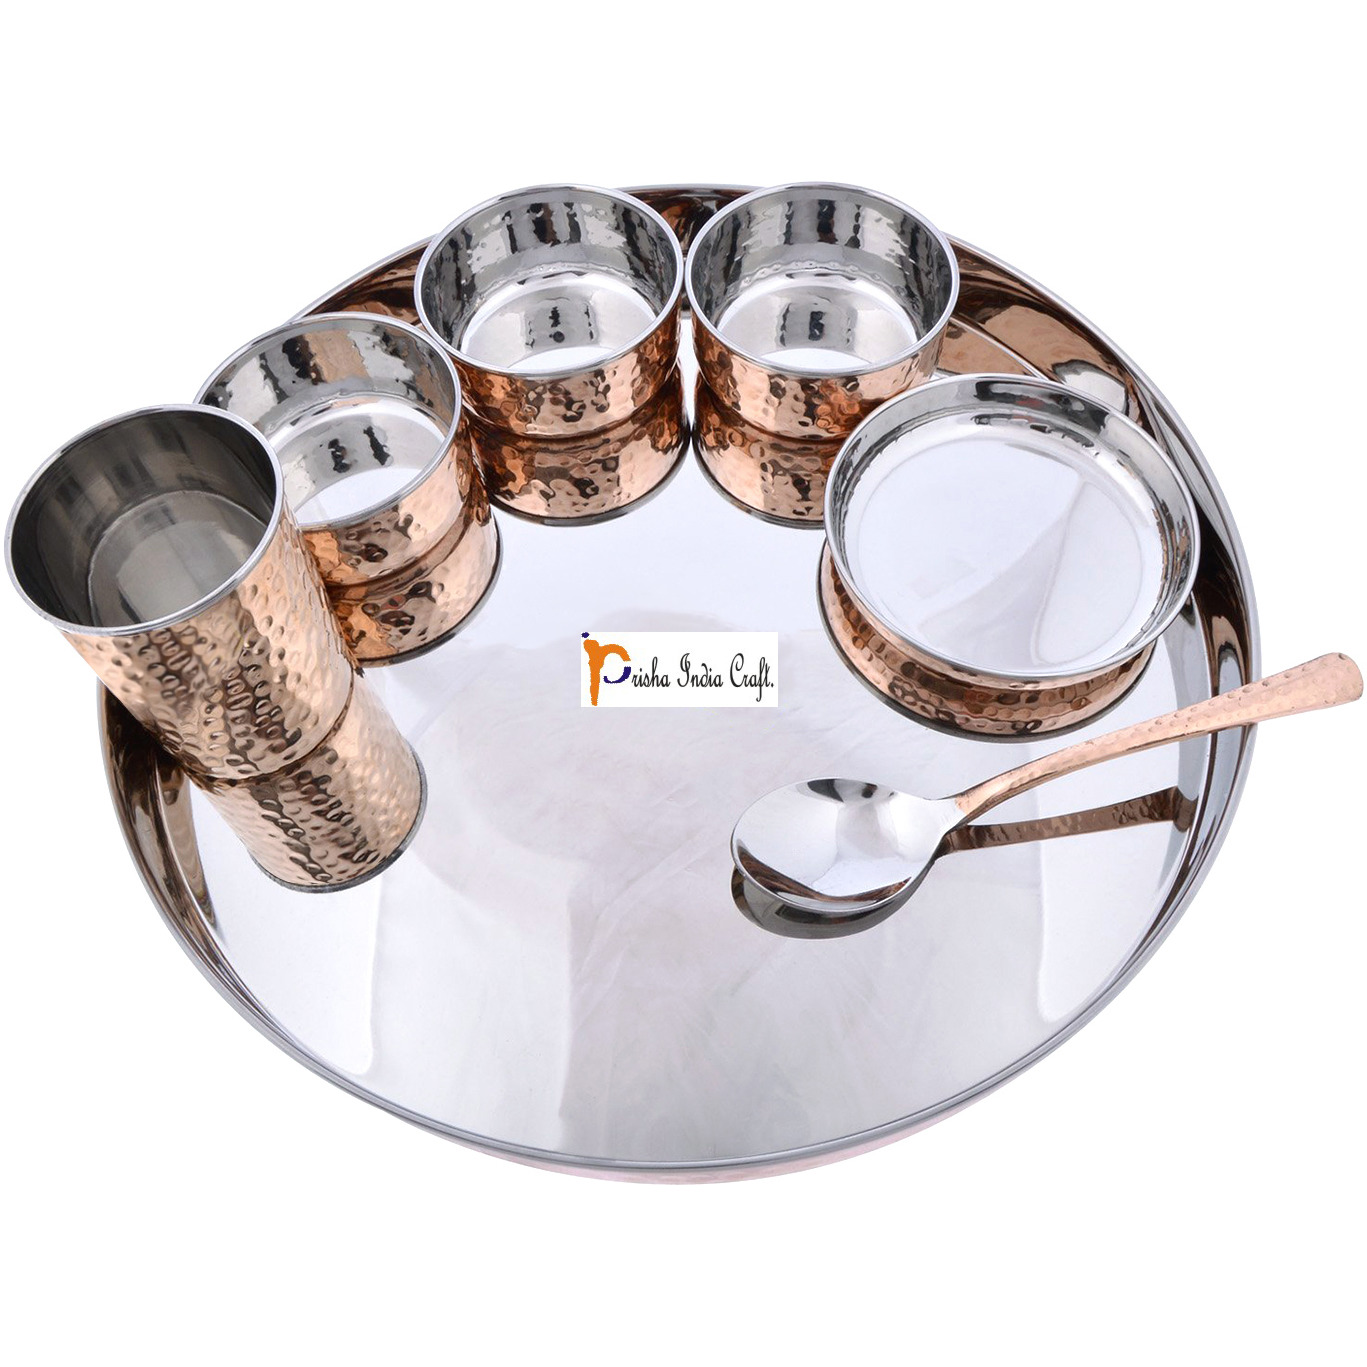 Prisha India Craft B. Dinnerware Traditional Stainless Steel Copper Dinner Set of Thali Plate, Bowls, Glass and Spoon, Dia 13  With 1 Luxury Style Pitcher Jug - Christmas Gift